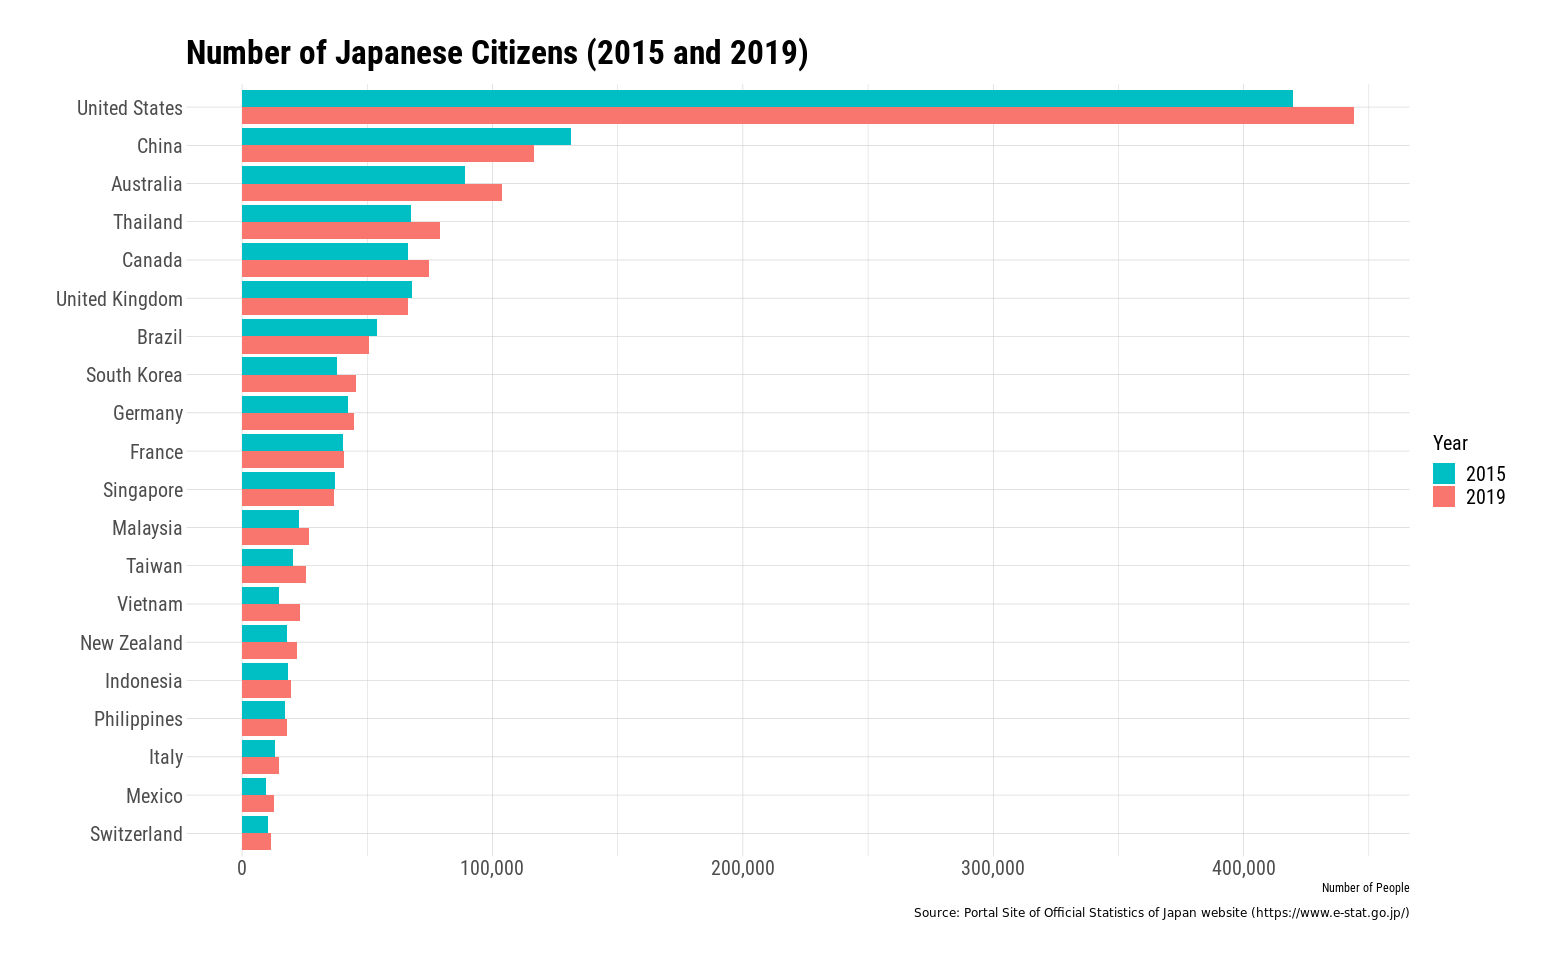 Bar graph of number of Japanese citizens by country in 2015 and 2019